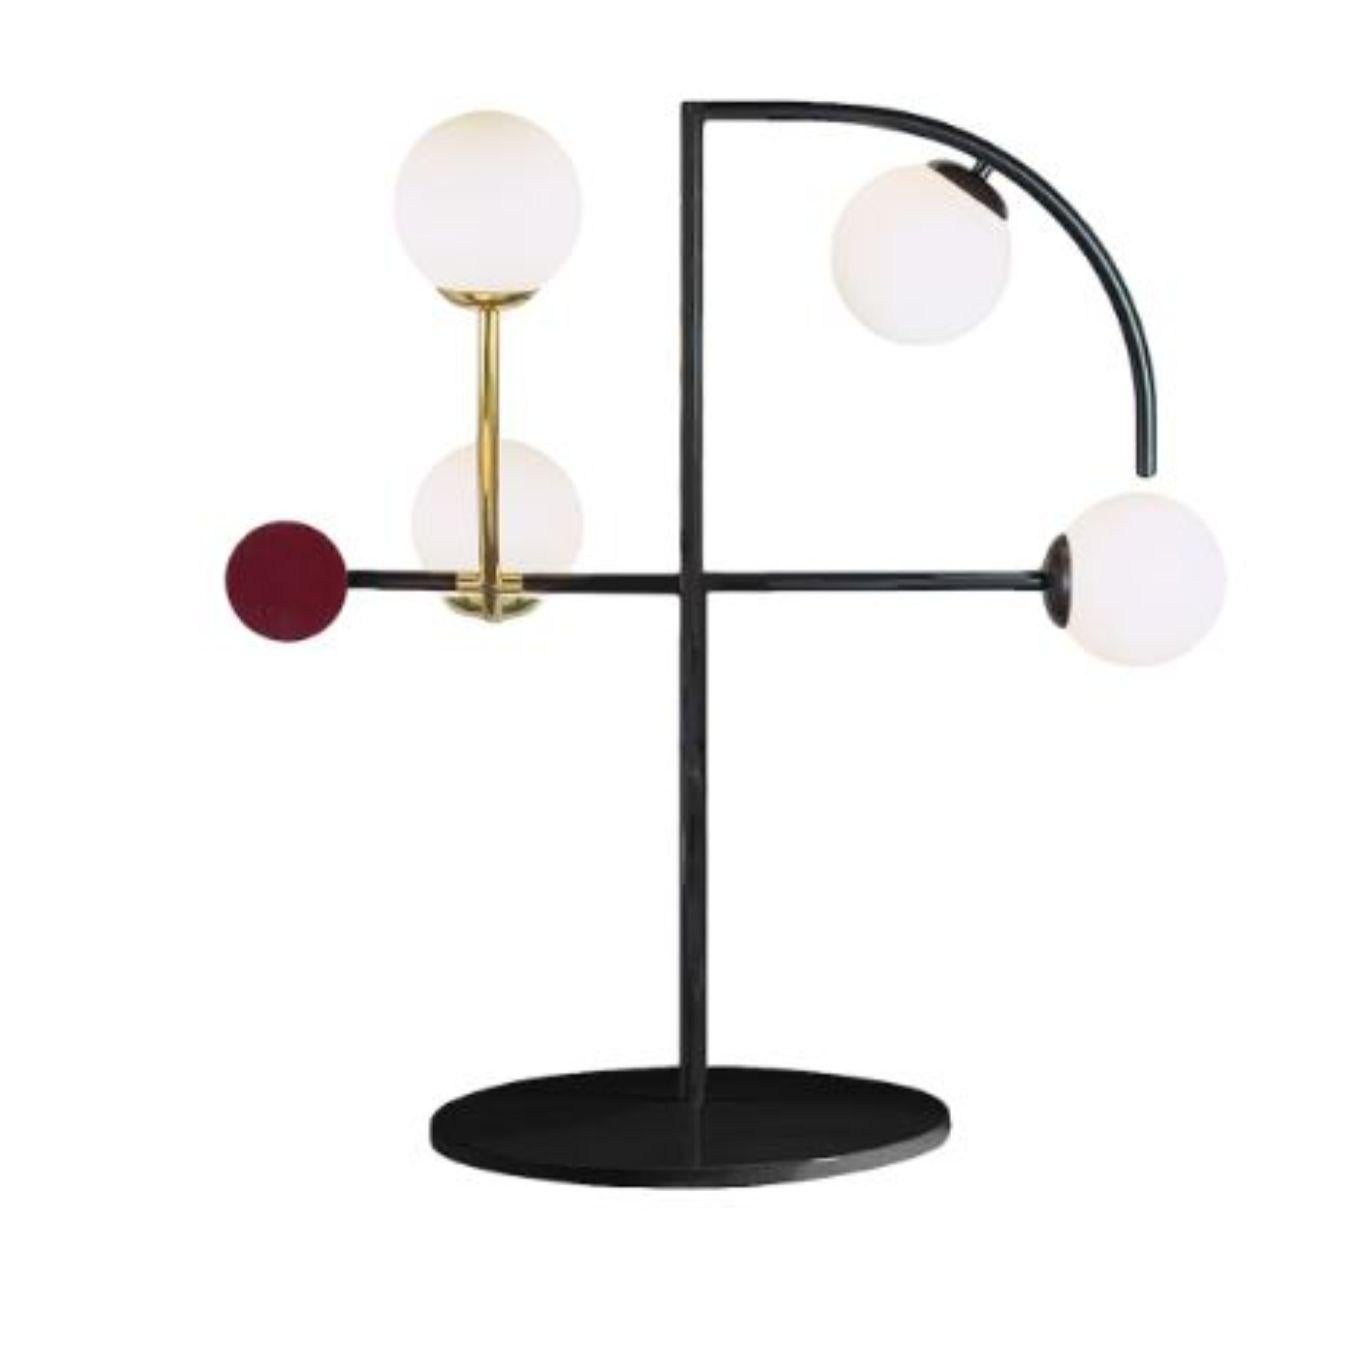 Black Helio table lamp by Dooq.
Dimensions: W 50 x D 25 x H 67 cm
Materials: lacquered metal, brass/nickel.
Also available in different colors and materials. 

Information:
230V/50Hz
4 x max. G9
4W LED

120V/60Hz
4 x max. G9
4W